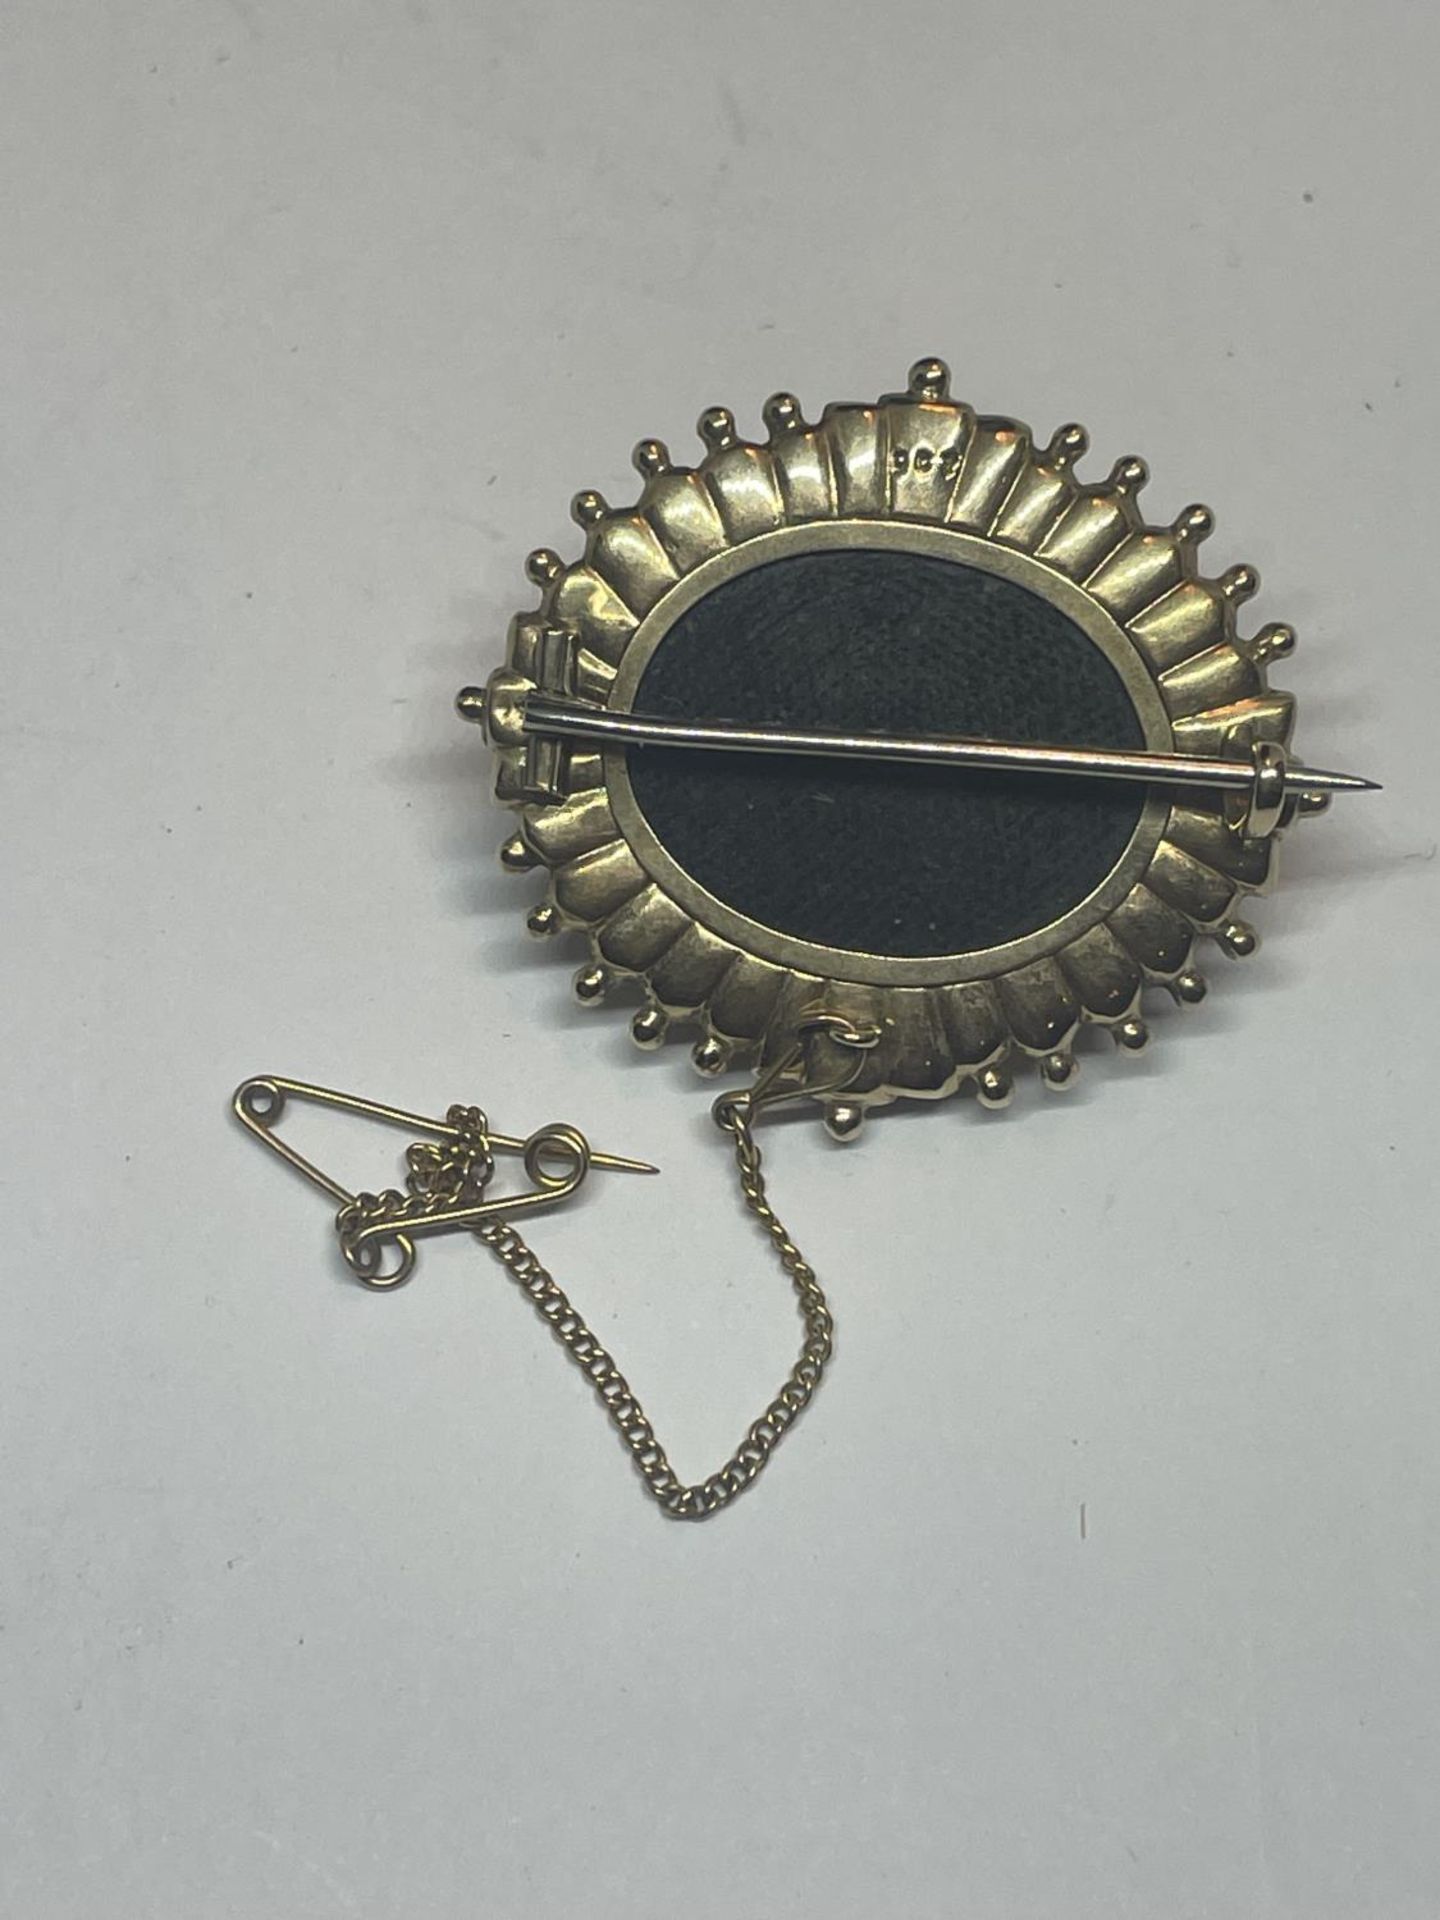 A 9 CARAT GOLD BROOCH WITH SAFETY CHAIN AND PIN GROSS WEIGHT 6.93 GRAMS IN A PRESENTATION BOX - Image 2 of 3